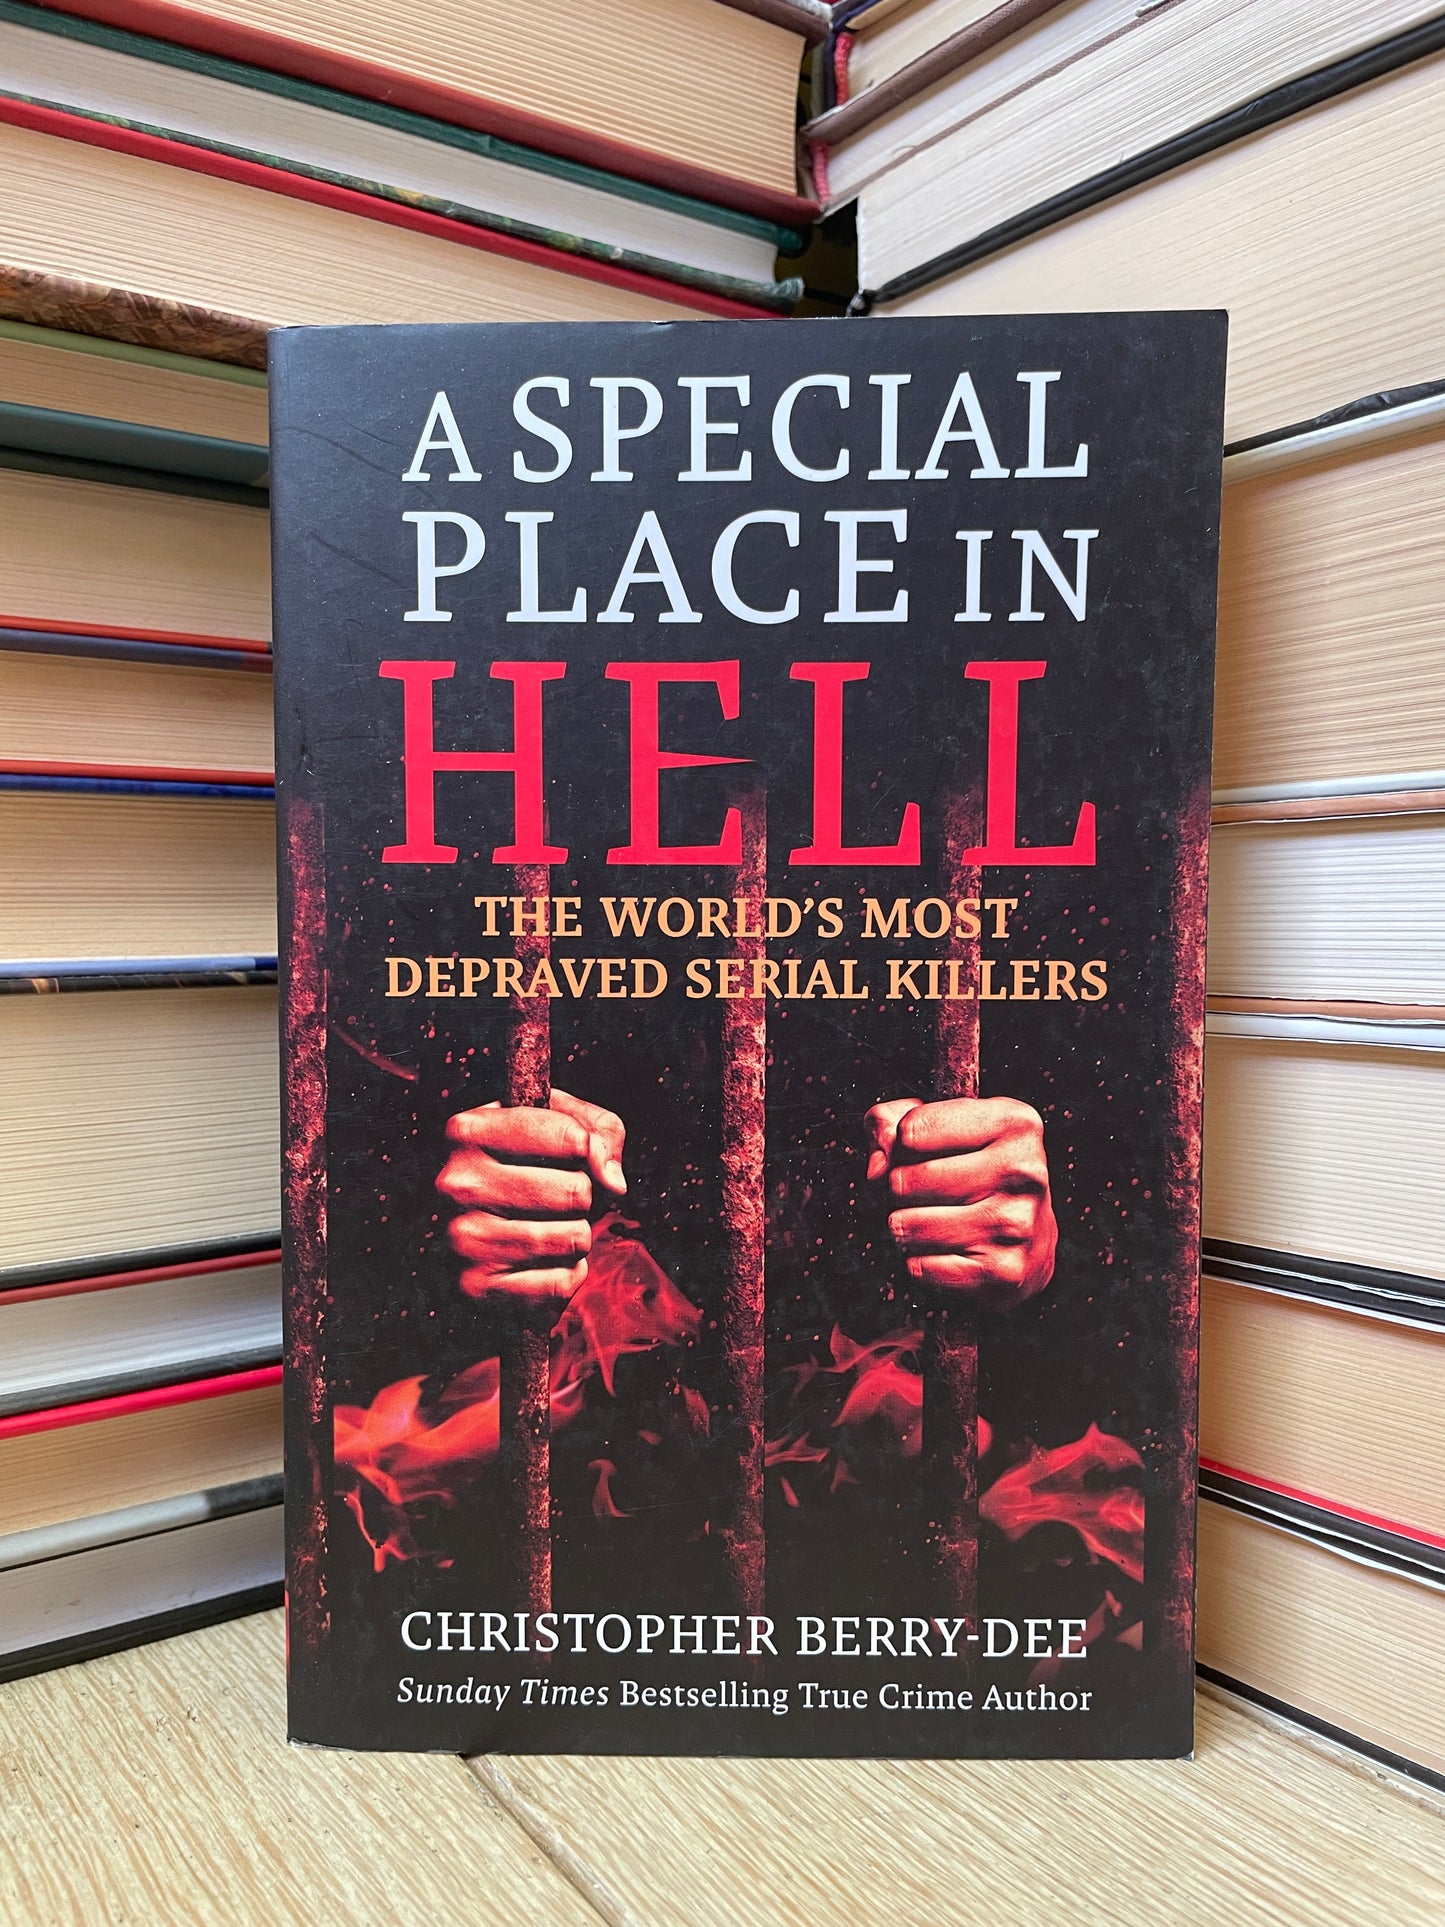 Christopher Berry-Dee - A Special Place in Hell